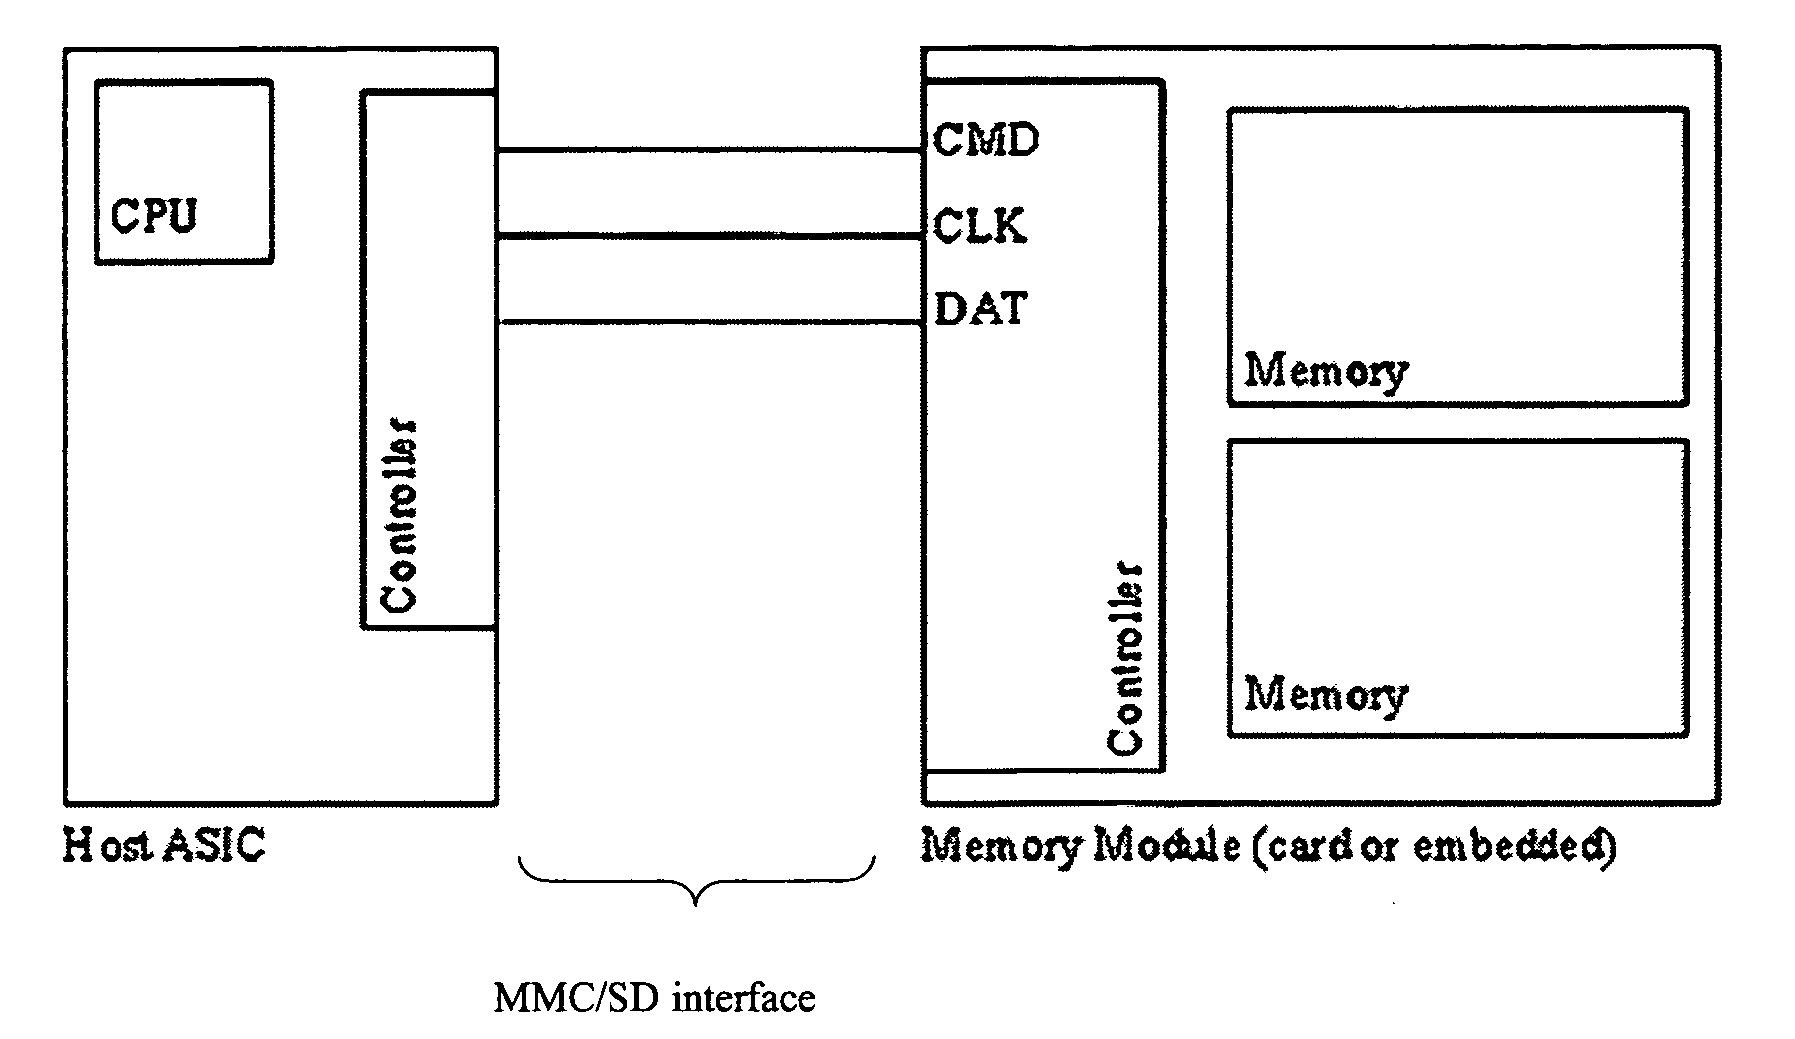 Method for booting a host device from an MMC/SD device, a host device bootable from an MMC/SD device and an MMC/SD device method a host device may be booted from